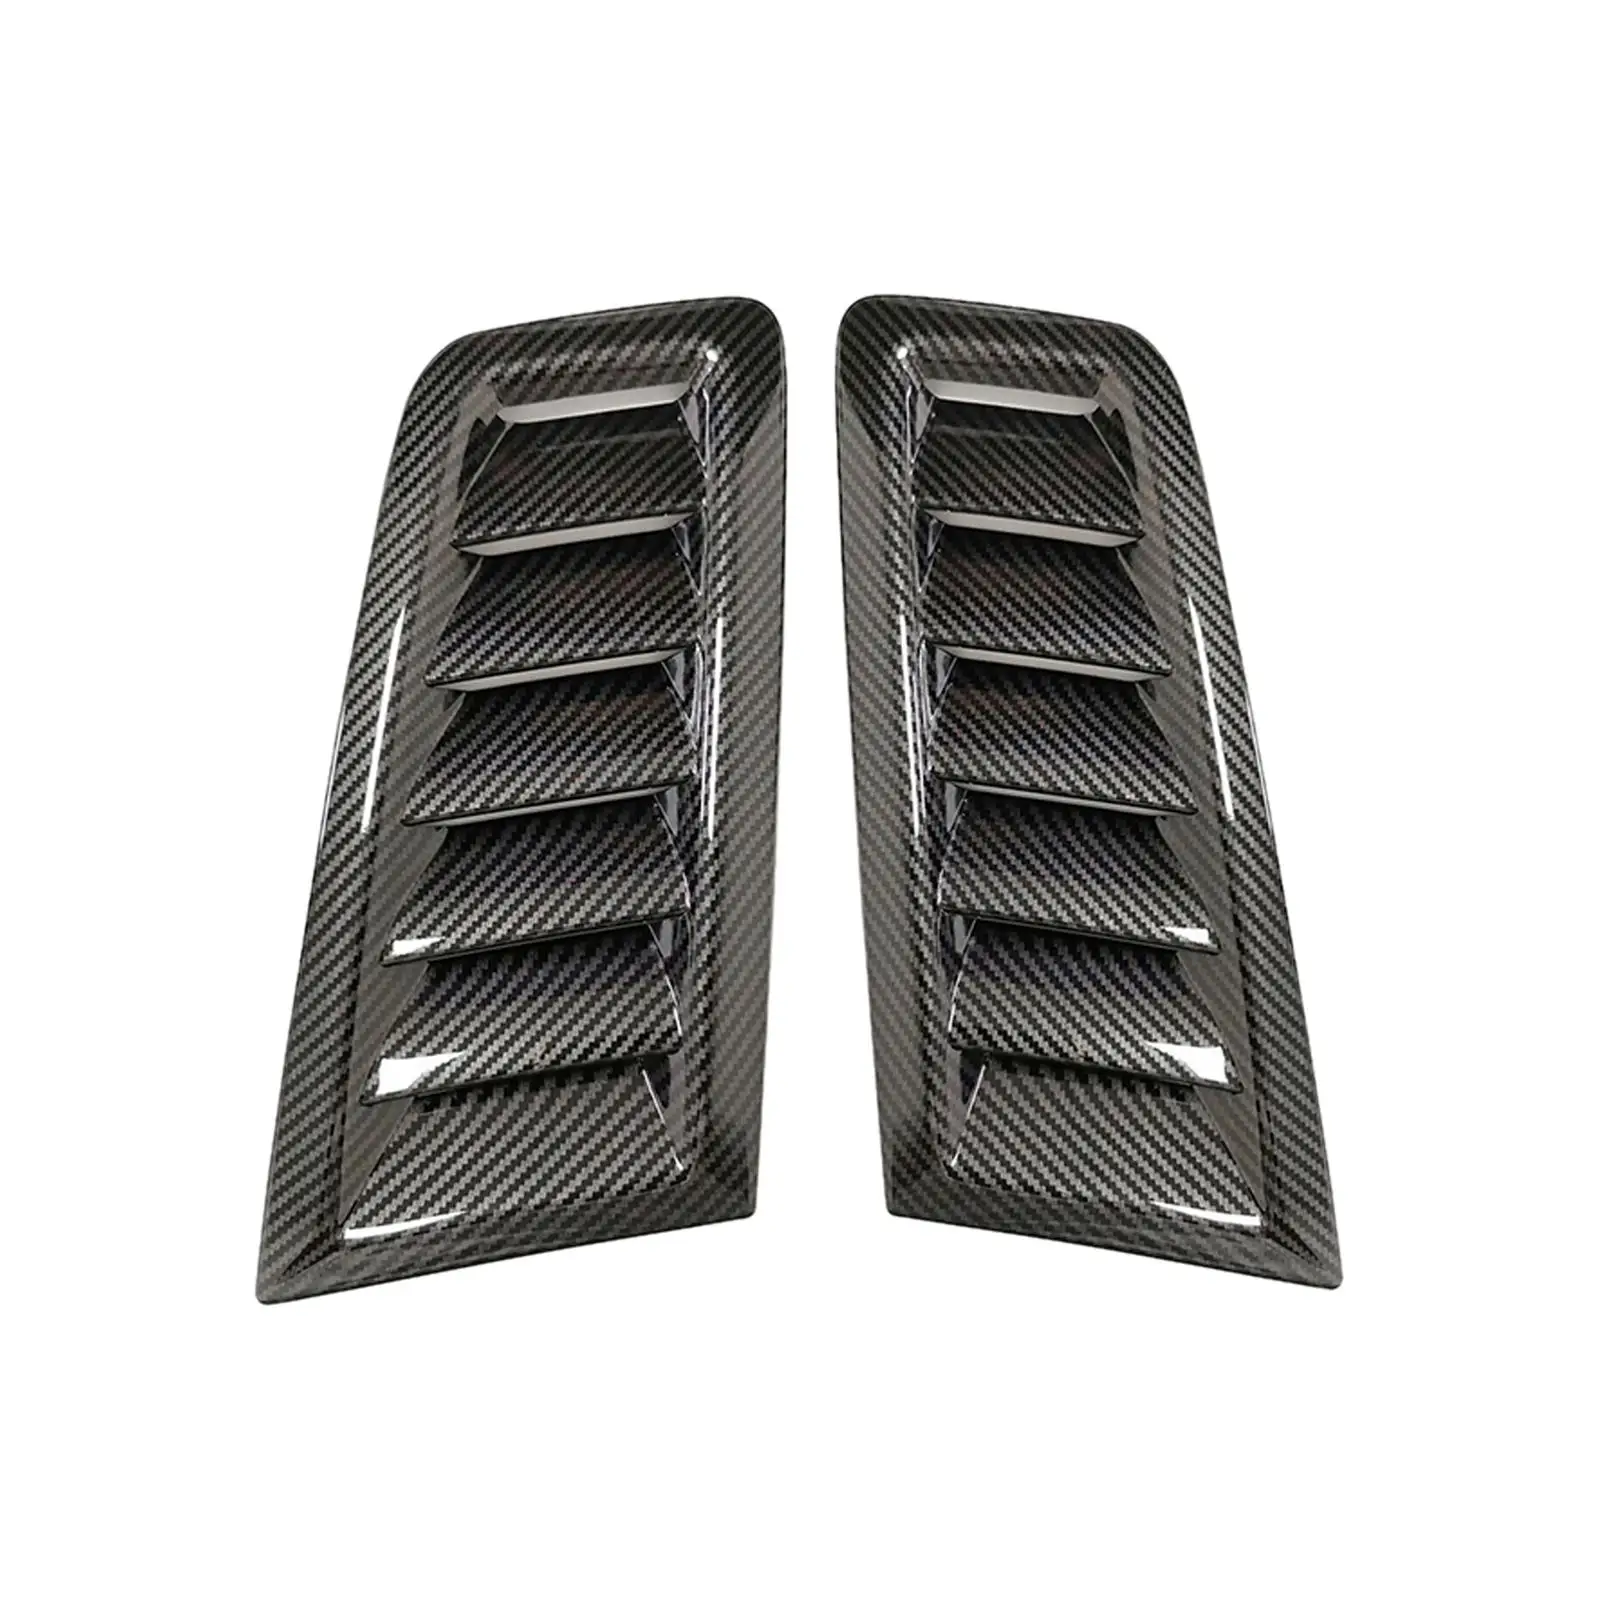 2 Pieces Car Hood Vent Scoops Exterior Parts High Quality Air Intake Hood Vents